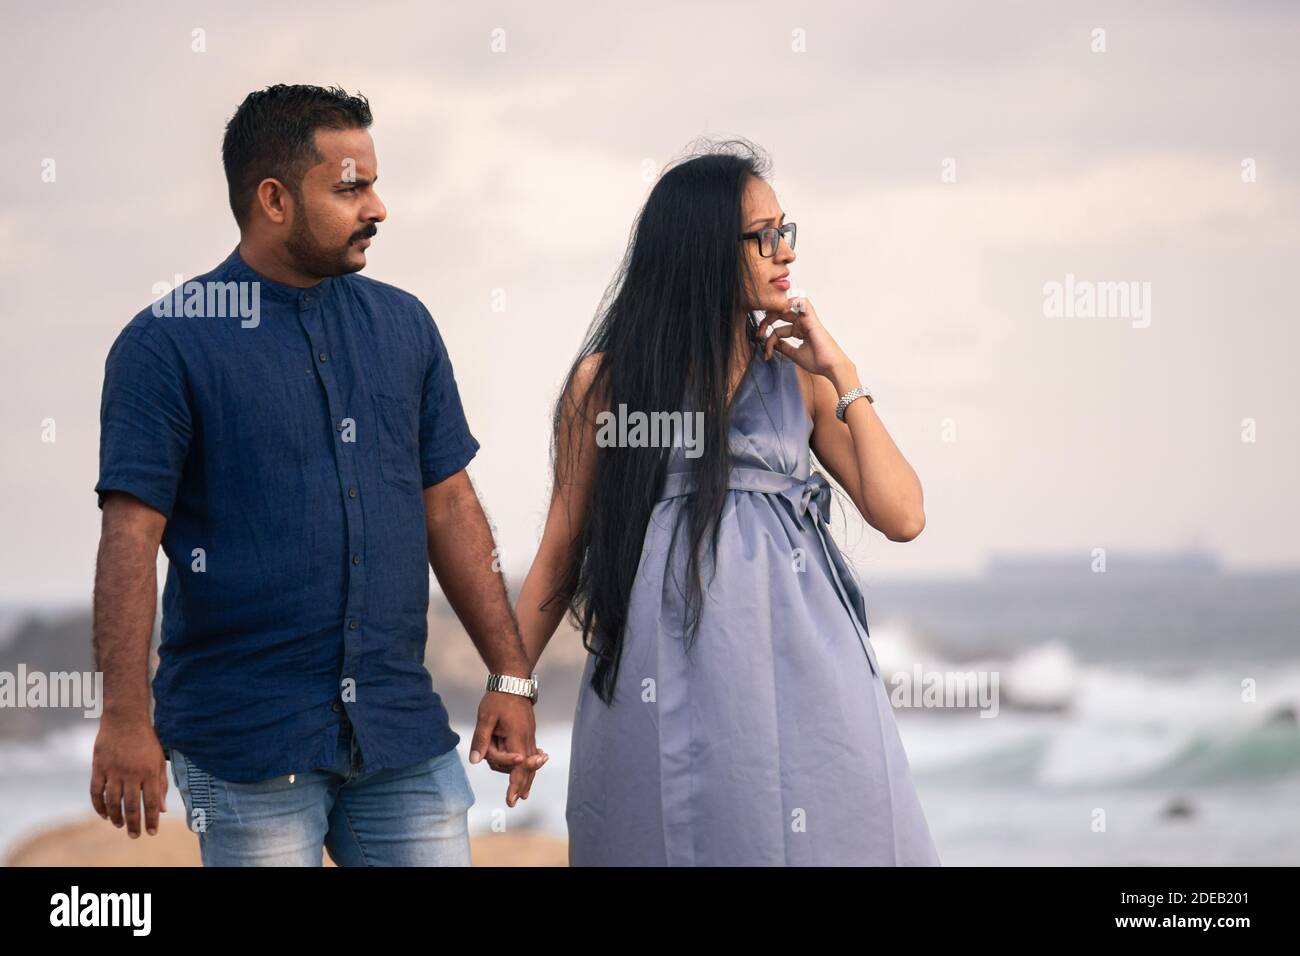 South Asian, Sri Lankan couple Holding hands in the evening, looking at the sunset, maternity fashion, expectations of a child. Stock Photo